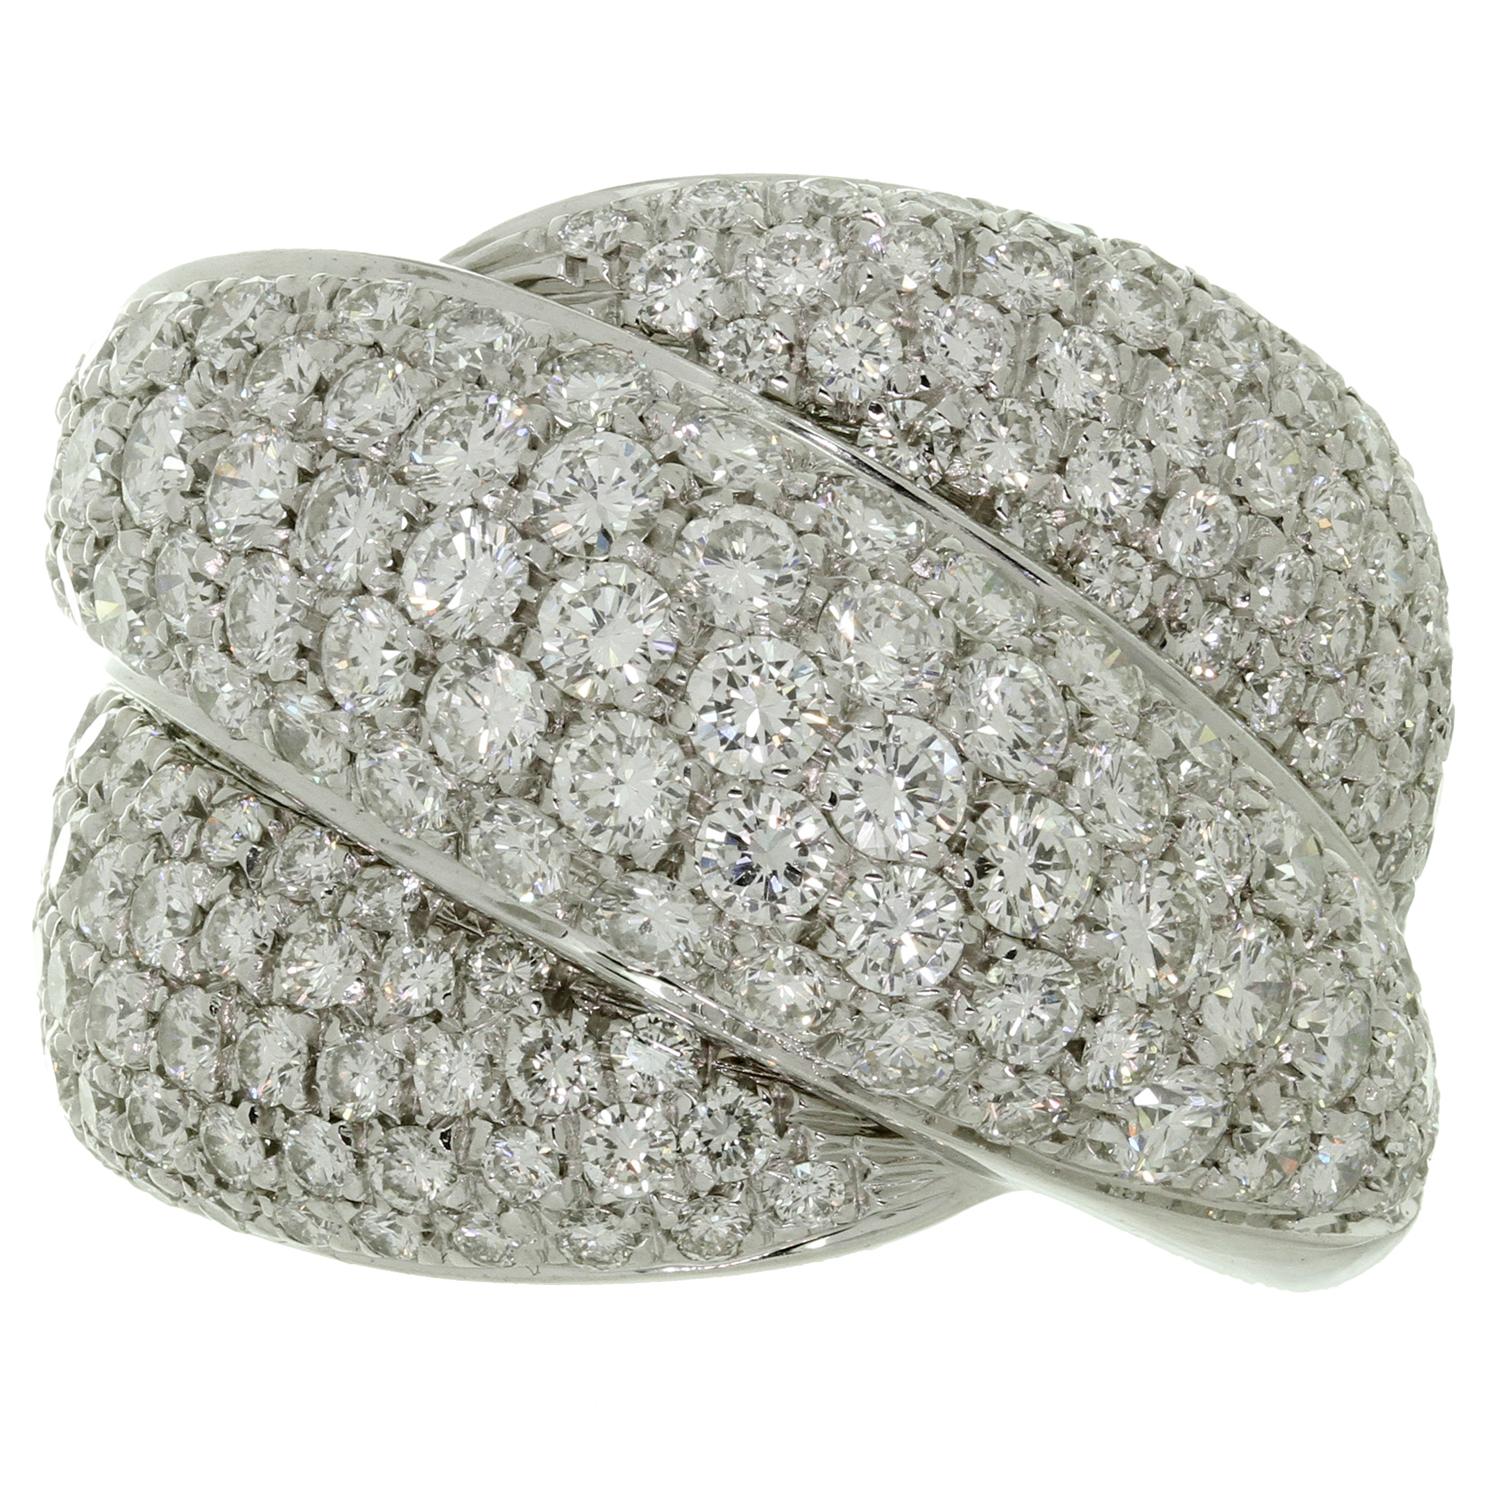 This stunning Damiani ring from the classic Gomitolo collection features a sparkling entwined band design crafted in 18k white gold and pave set with brilliant-cut round F-G VVS2-VS1 diamonds weighing an estimated 5.0 carats. Made in Italy circa